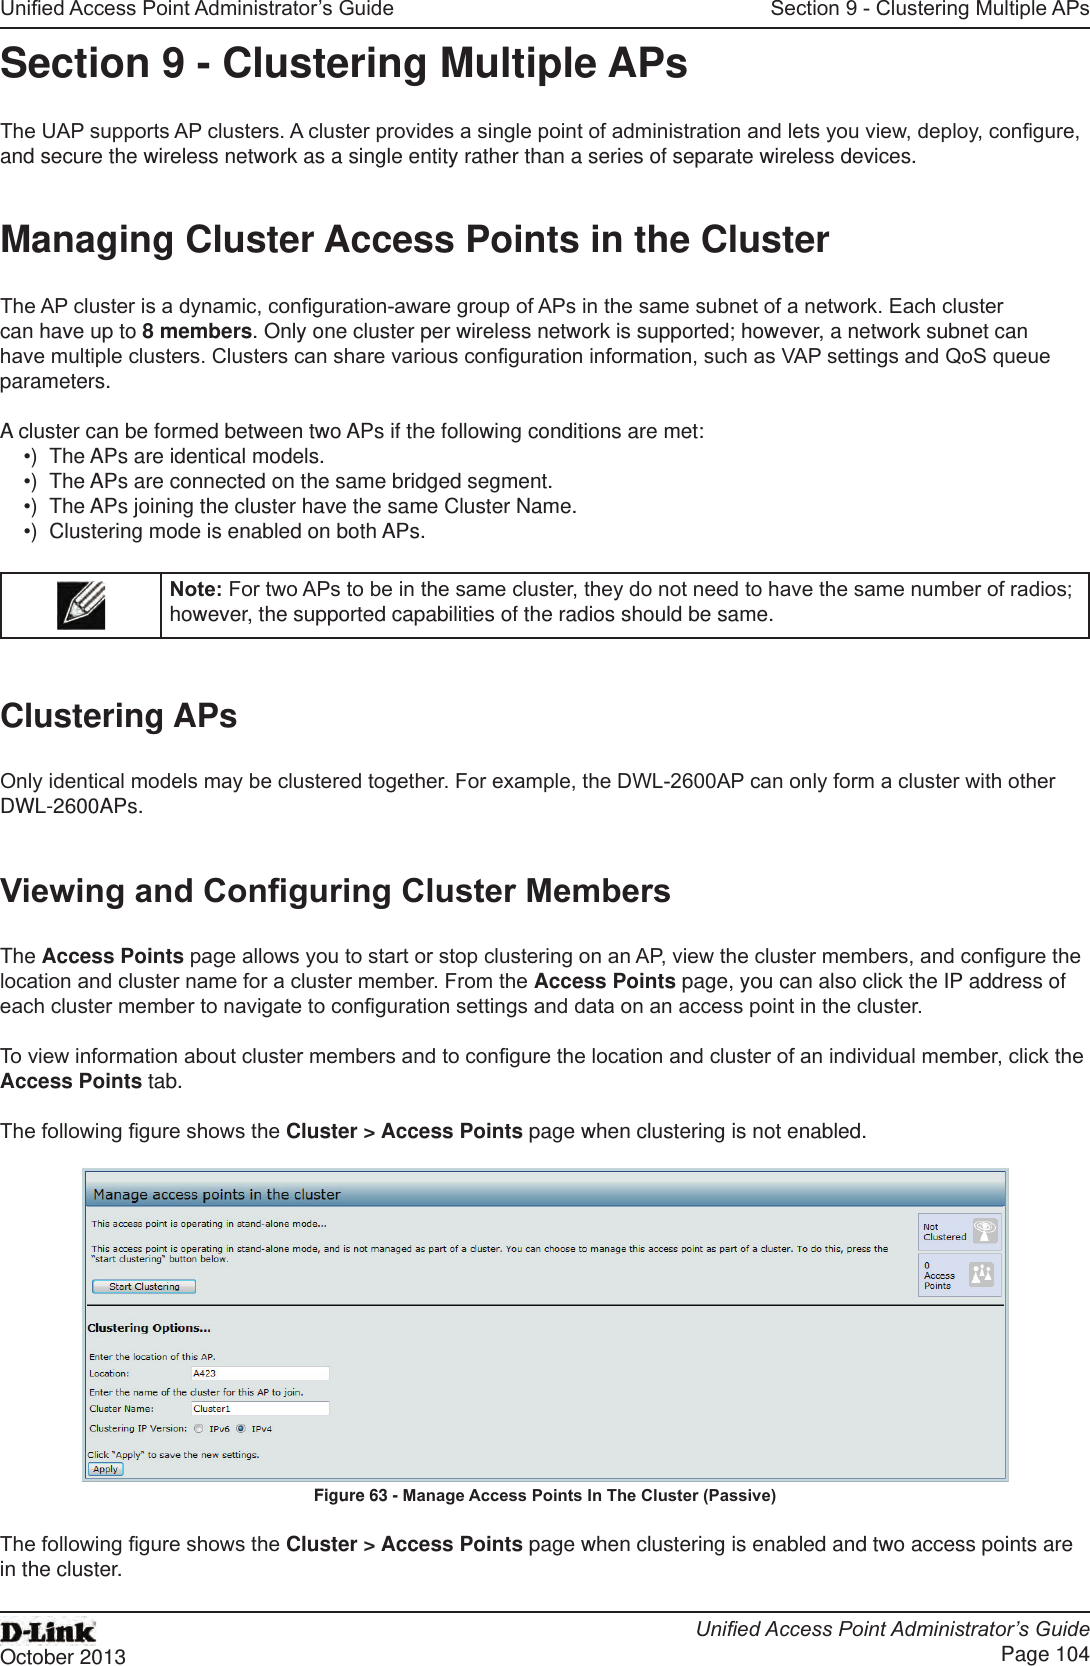 Unied Access Point Administrator’s GuideUnied Access Point Administrator’s GuidePage 104October 2013Section 9 - Clustering Multiple APsSection 9 - Clustering Multiple APsThe UAP supports AP clusters. A cluster provides a single point of administration and lets you view, deploy, congure, and secure the wireless network as a single entity rather than a series of separate wireless devices. Managing Cluster Access Points in the ClusterThe AP cluster is a dynamic, conguration-aware group of APs in the same subnet of a network. Each cluster can have up to 8 members. Only one cluster per wireless network is supported; however, a network subnet can have multiple clusters. Clusters can share various conguration information, such as VAP settings and QoS queue parameters.A cluster can be formed between two APs if the following conditions are met:•)  The APs are identical models.•)  The APs are connected on the same bridged segment.•)  The APs joining the cluster have the same Cluster Name.•)  Clustering mode is enabled on both APs.Note: For two APs to be in the same cluster, they do not need to have the same number of radios; however, the supported capabilities of the radios should be same.Clustering APsOnly identical models may be clustered together. For example, the DWL-2600AP can only form a cluster with other DWL-2600APs.Viewing and Conguring Cluster MembersThe Access Points page allows you to start or stop clustering on an AP, view the cluster members, and congure the location and cluster name for a cluster member. From the Access Points page, you can also click the IP address of each cluster member to navigate to conguration settings and data on an access point in the cluster. To view information about cluster members and to congure the location and cluster of an individual member, click the Access Points tab.The following gure shows the Cluster &gt; Access Points page when clustering is not enabled.Figure 63 - Manage Access Points In The Cluster (Passive)The following gure shows the Cluster &gt; Access Points page when clustering is enabled and two access points are in the cluster.